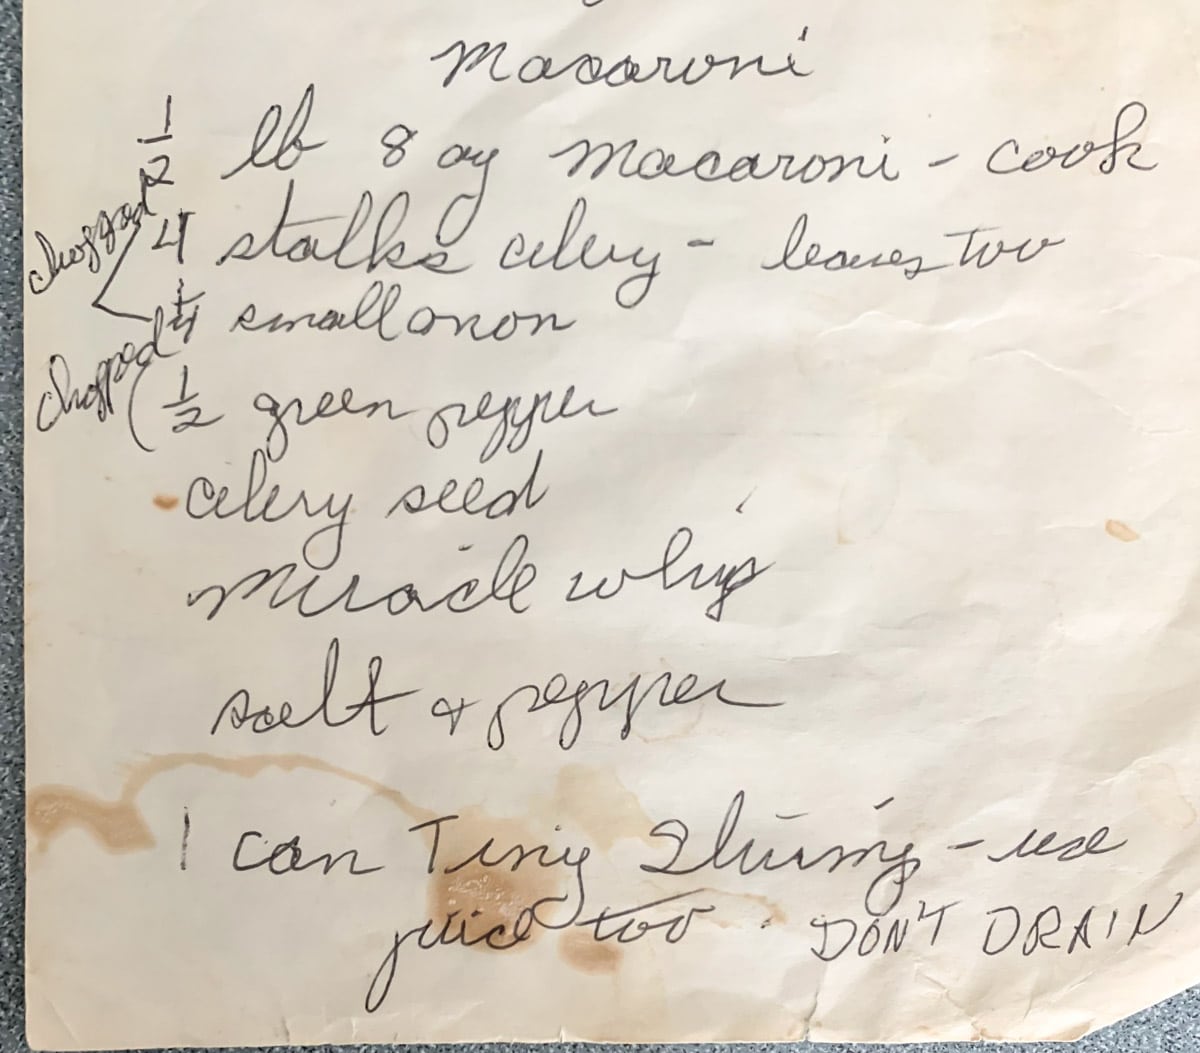 image of a handwritten recipe for macaroni salad on old stained paper